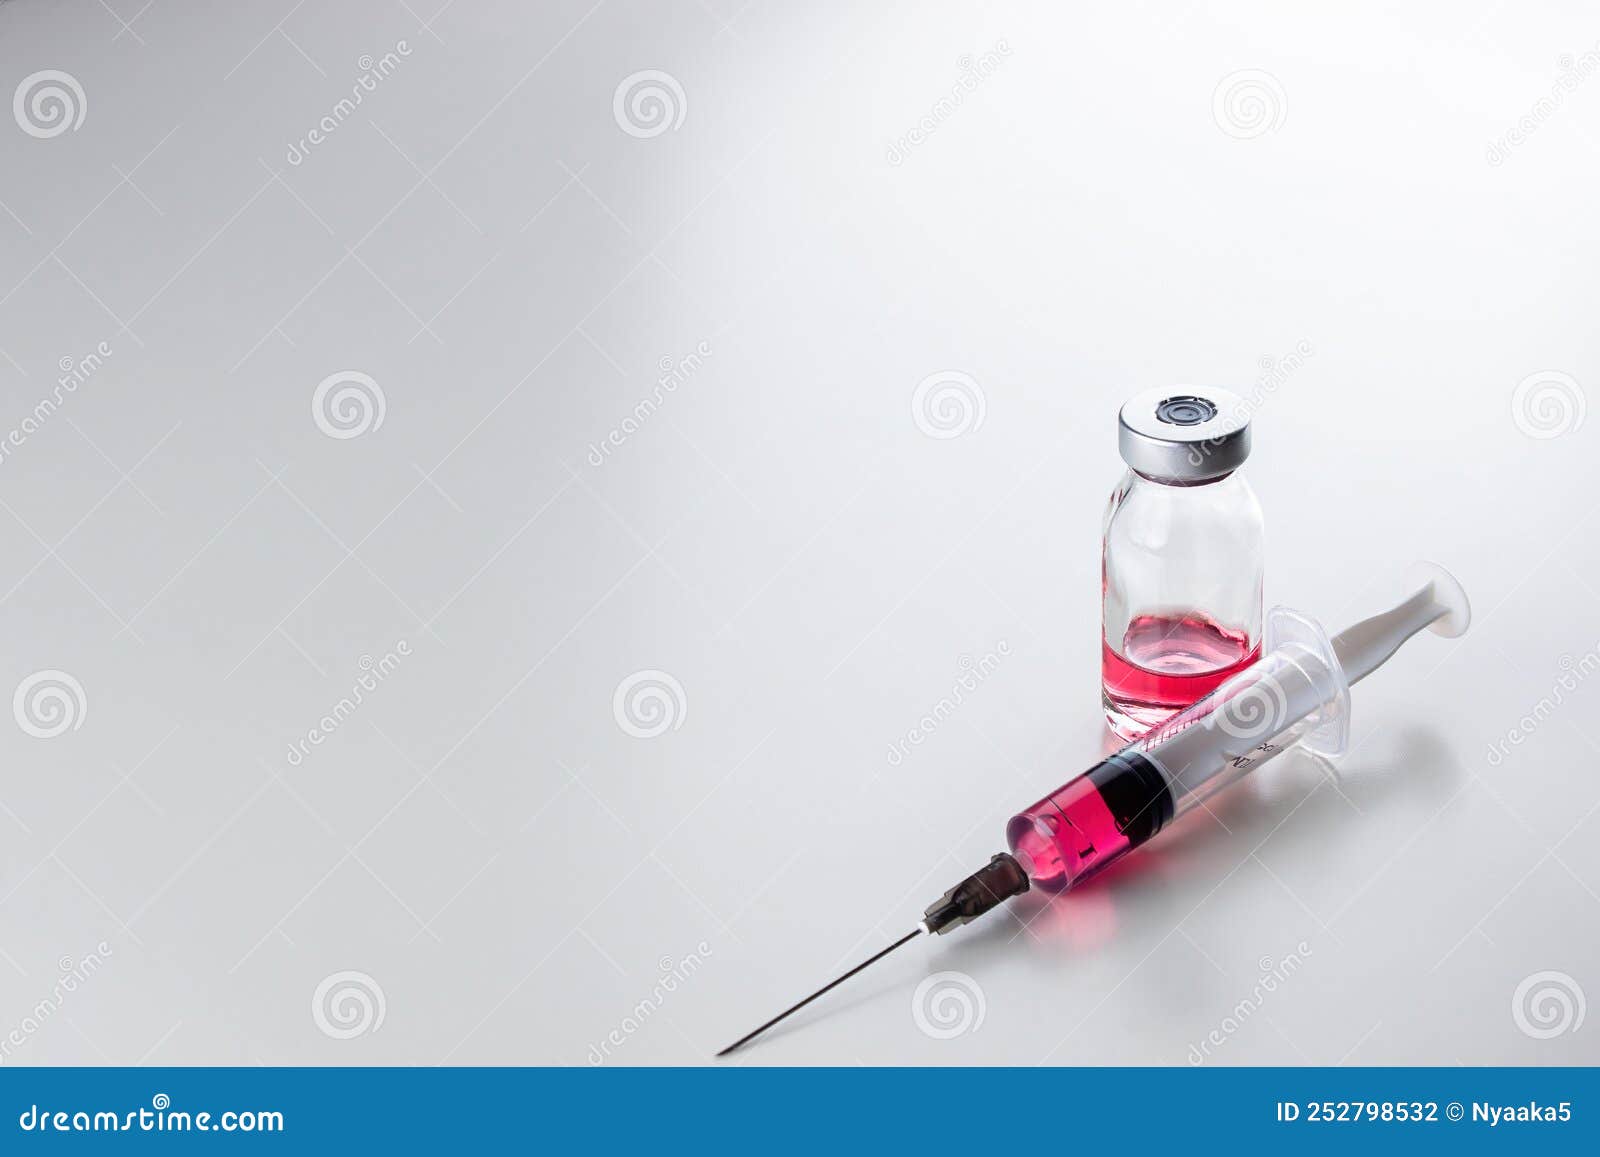 red liquid vitamin b12 in a disposable syringe with a needle and in a glass ampoule on a white background.